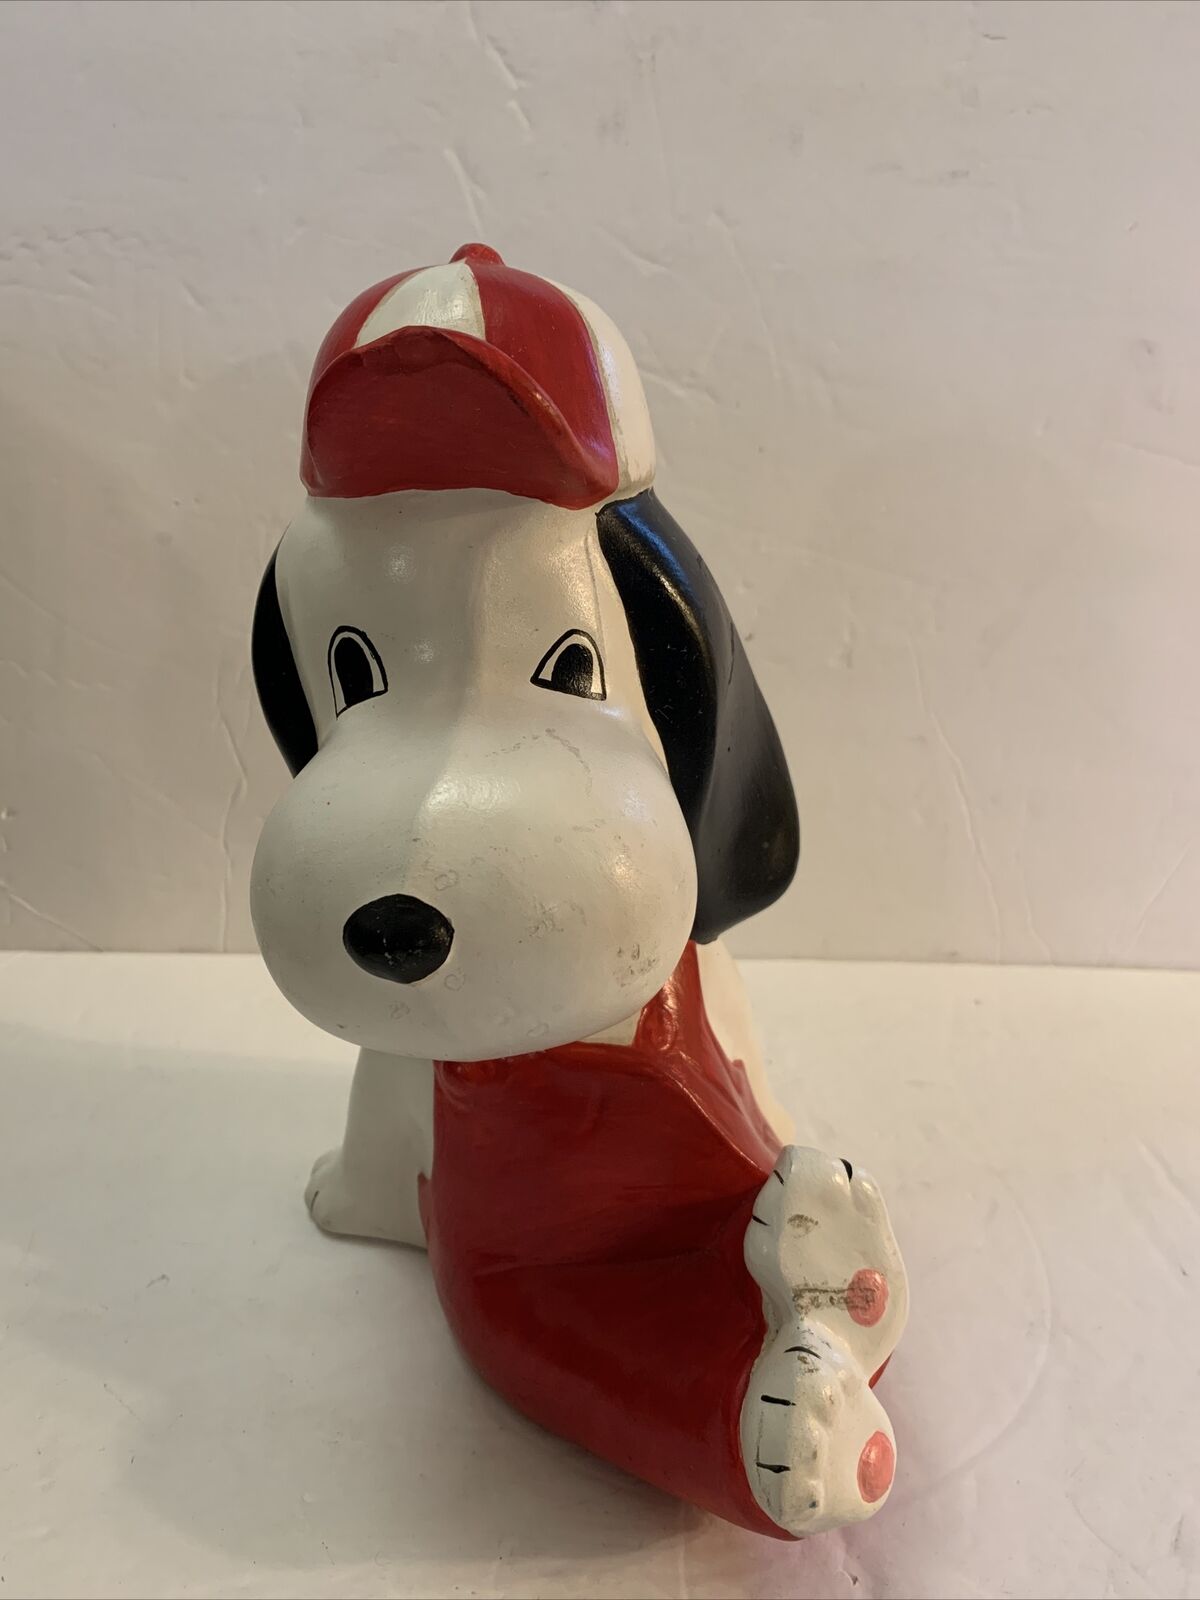 Snoopy Peanuts Ceramic Coin Bank Large  9.5” Tall Vintage